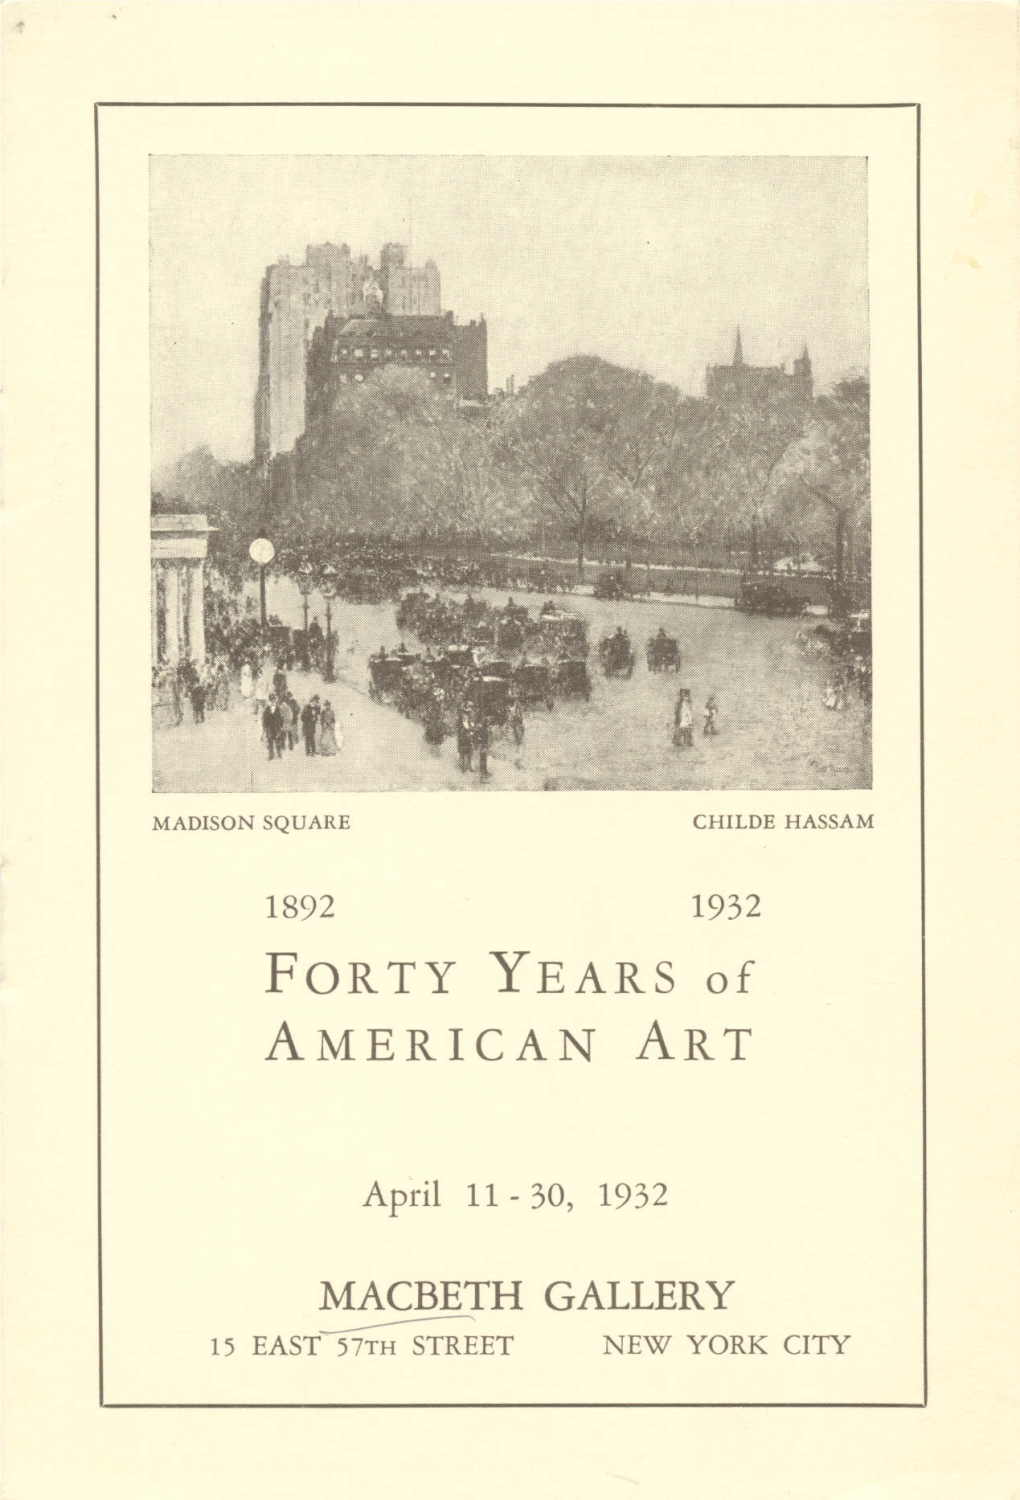 FORTY YEARS of AMERICAN ART